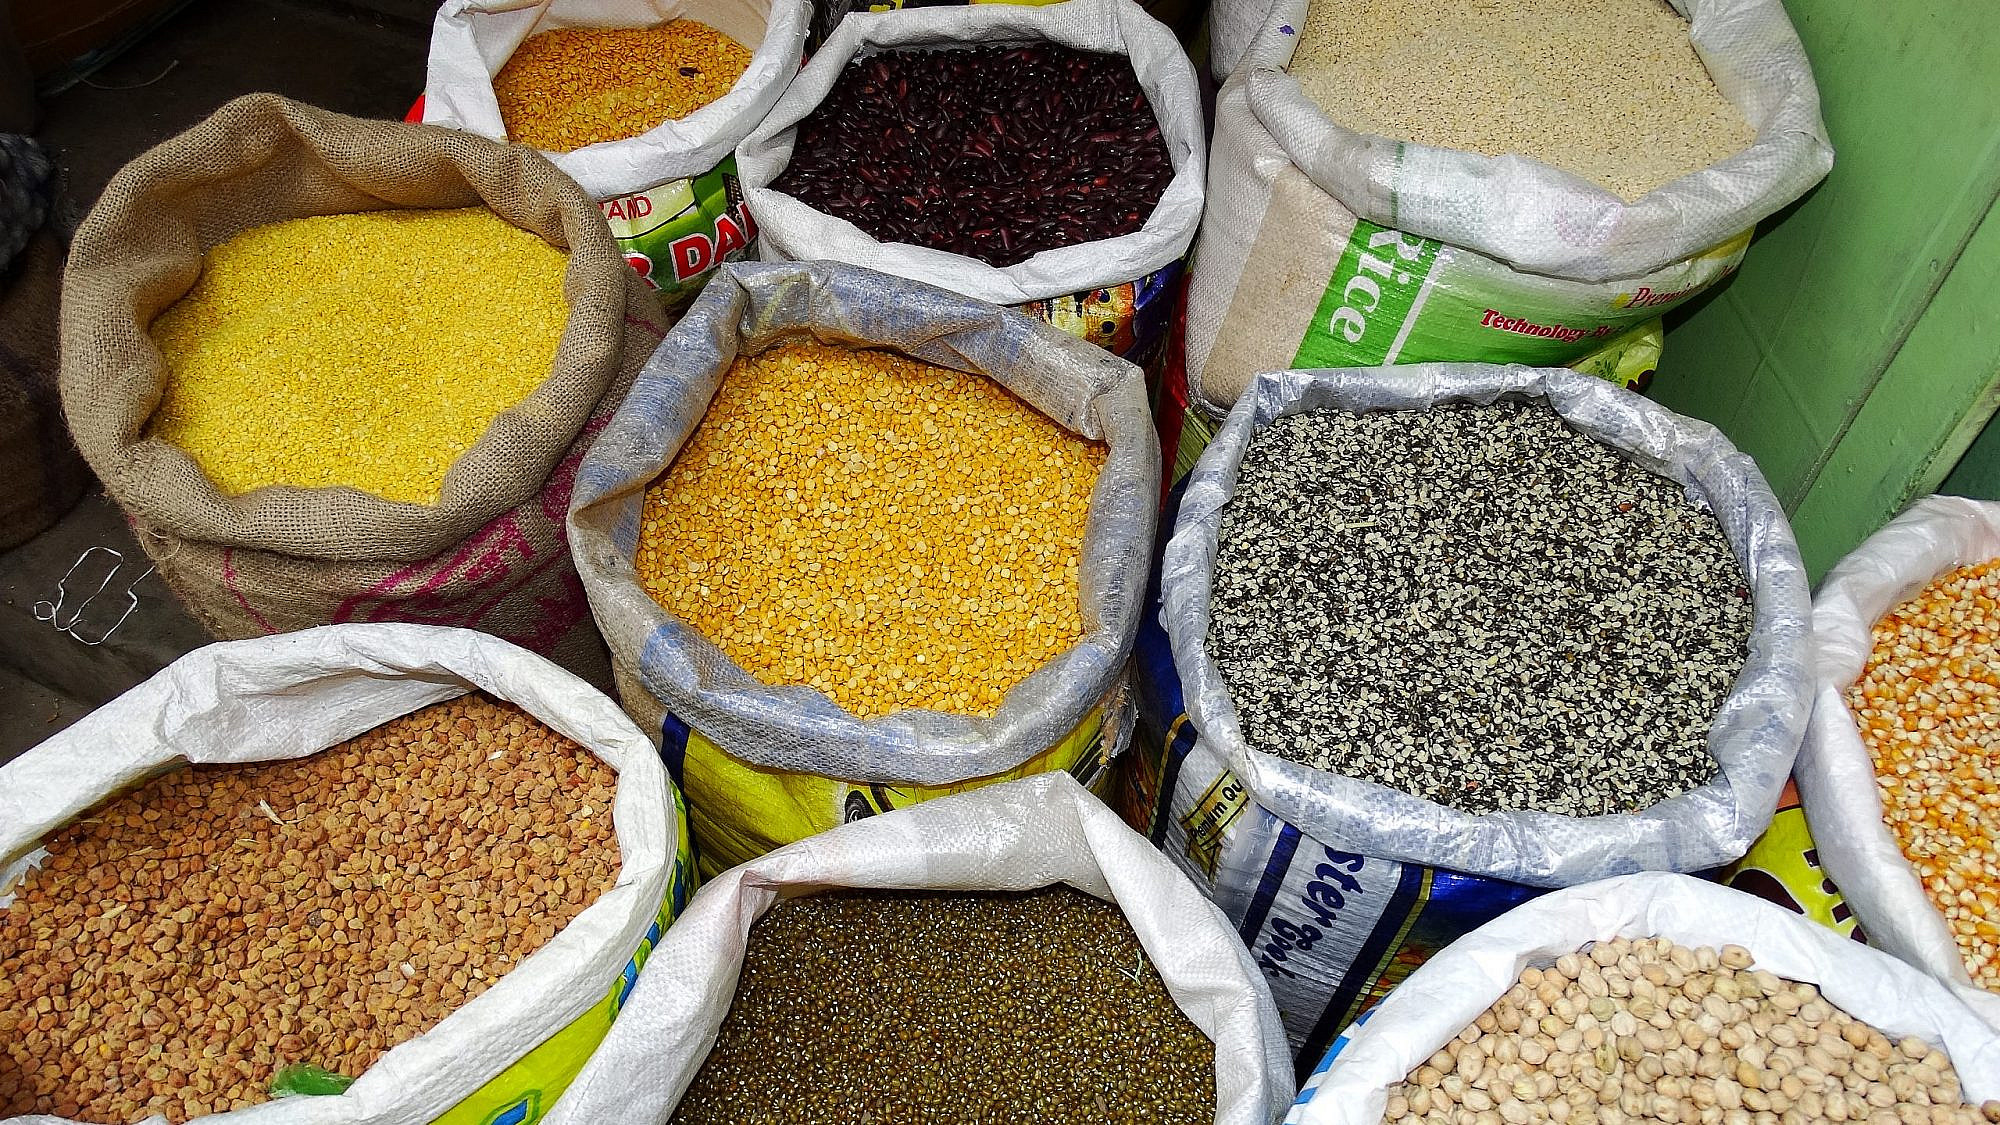 Pulses for sale in a market in India. Credit: Adam Jones from Kelowna, British Columbia, Canada, via Wikimedia Commons.